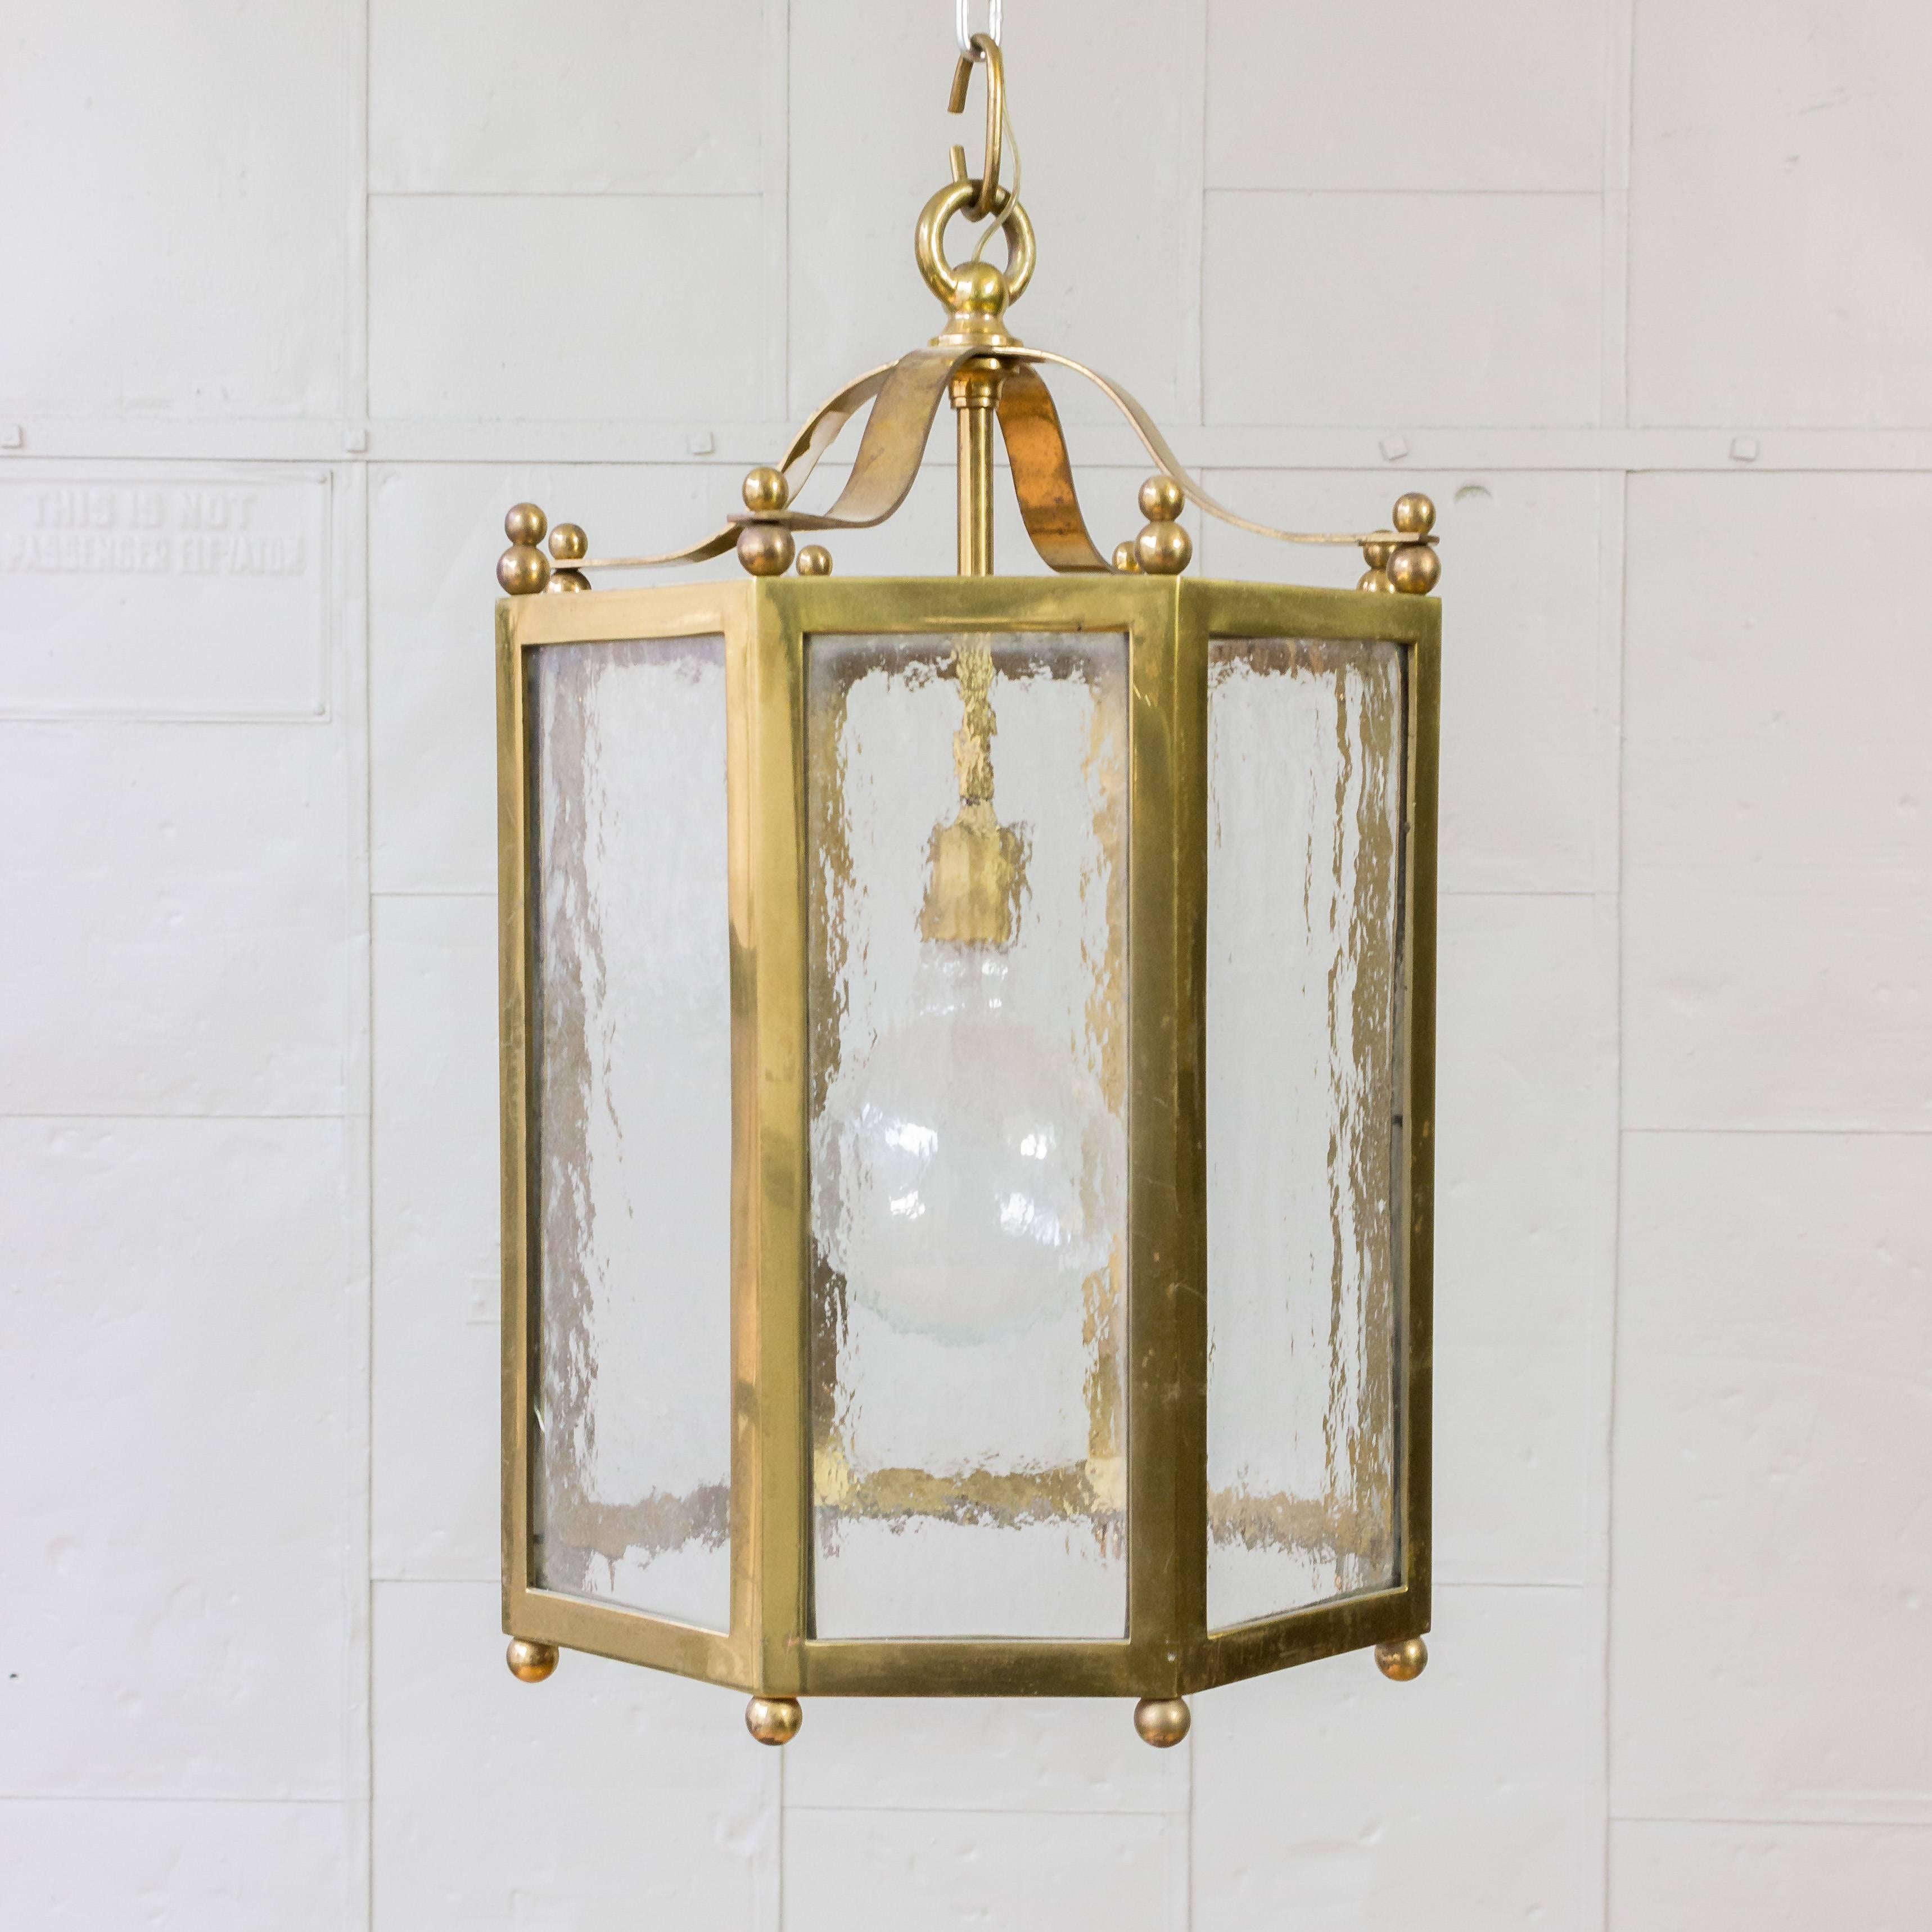 An elegant  French brass and glass octagonal lantern composed of eight intricately-textured glass panes encased within a sleek brass frame. This stunning lantern emits a warm and welcoming glow that adds charm to any indoor or outdoor space.